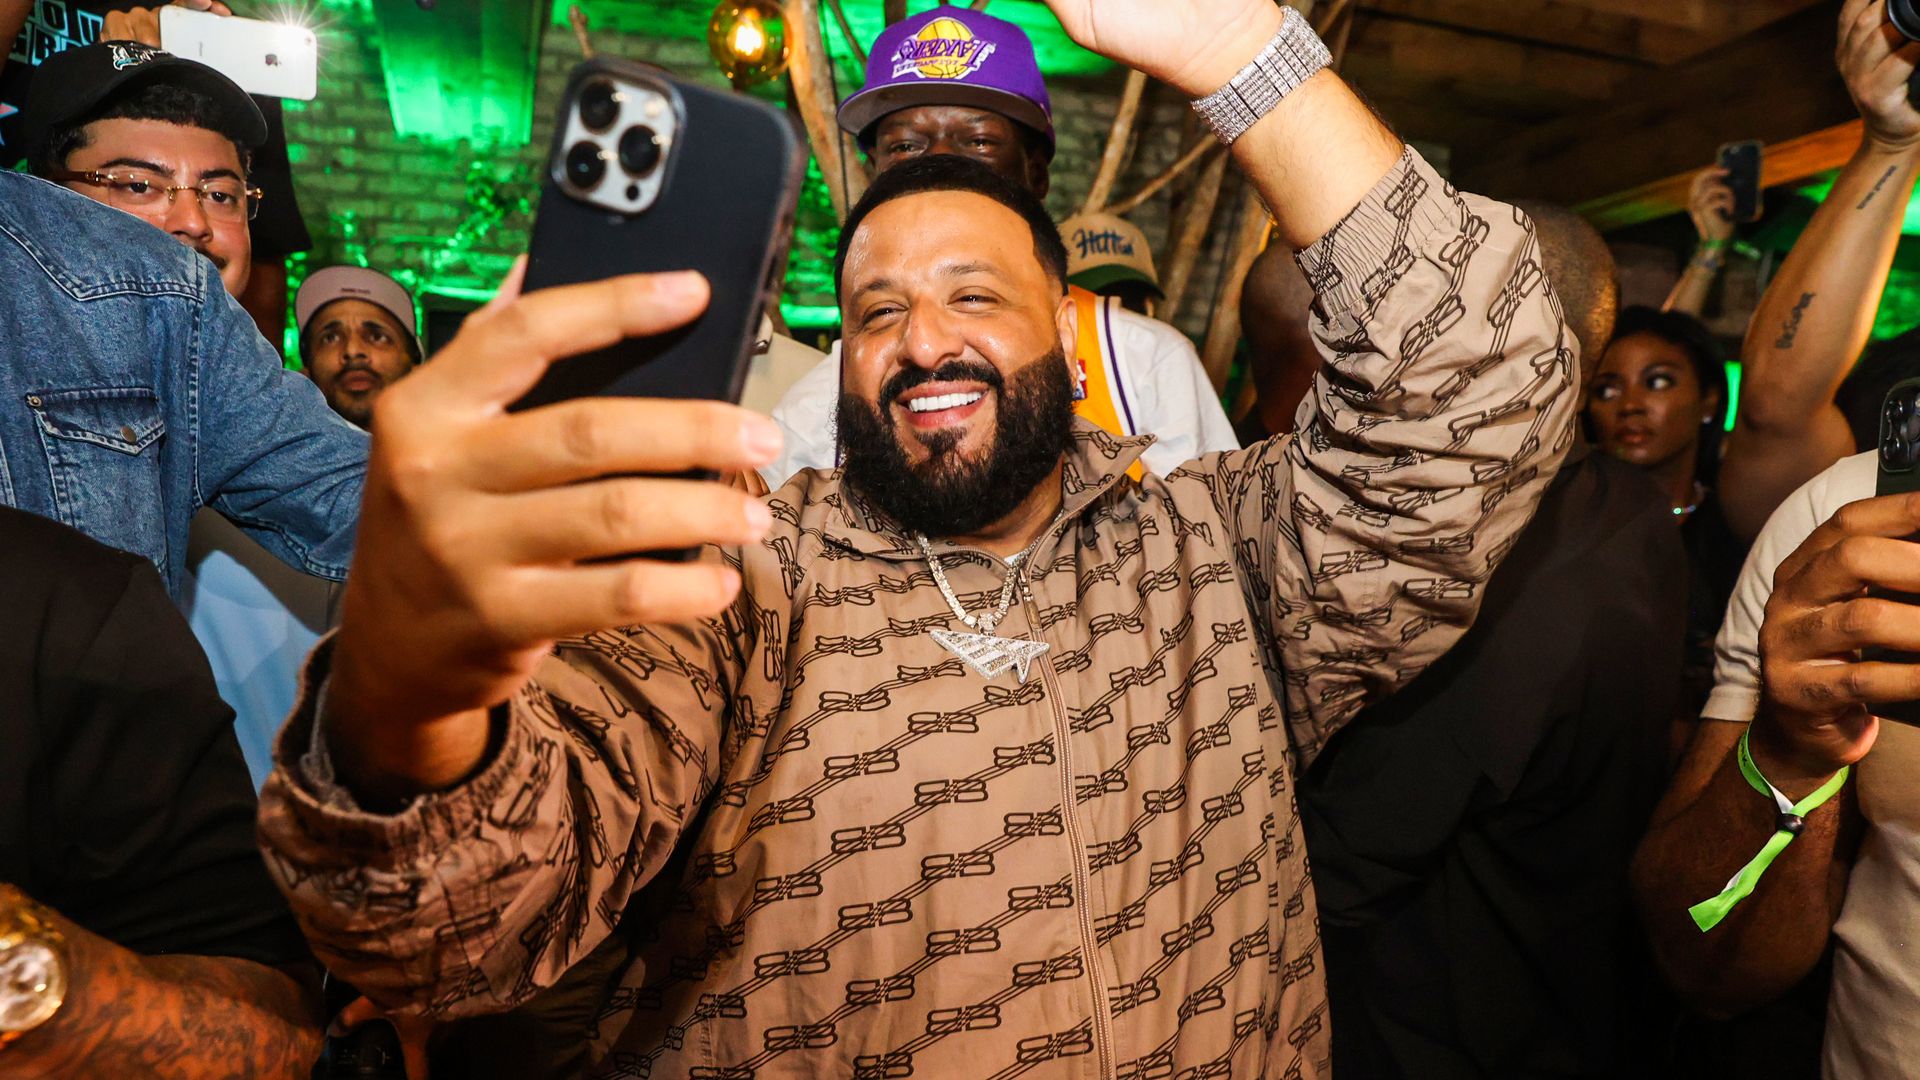 Dj Khaled attends Dj Khaled "God Did" Album Release Party on August 27, 2022 in New York City. 